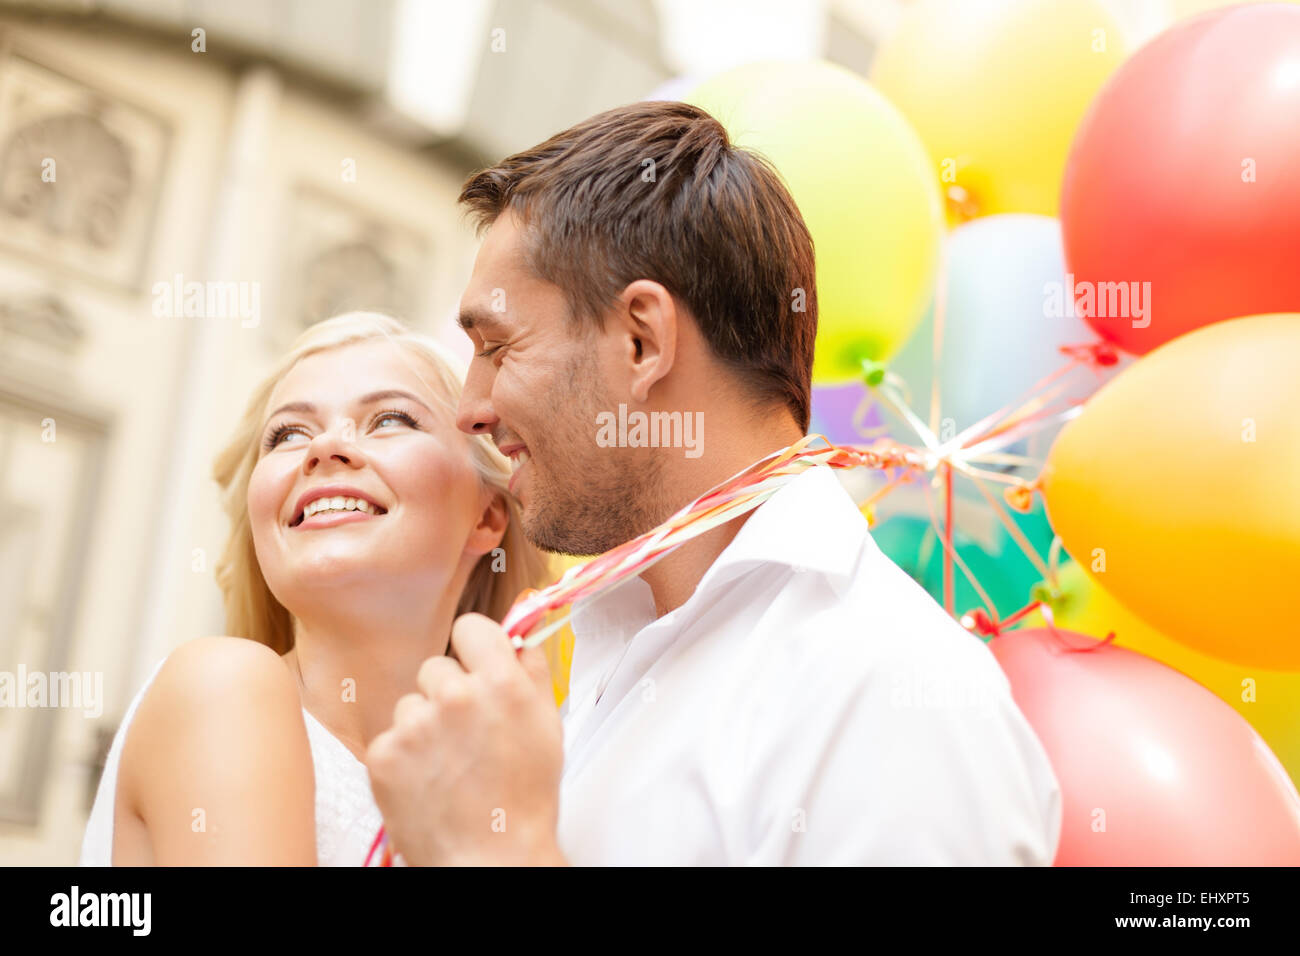 happy couple with colorful balloons Stock Photo